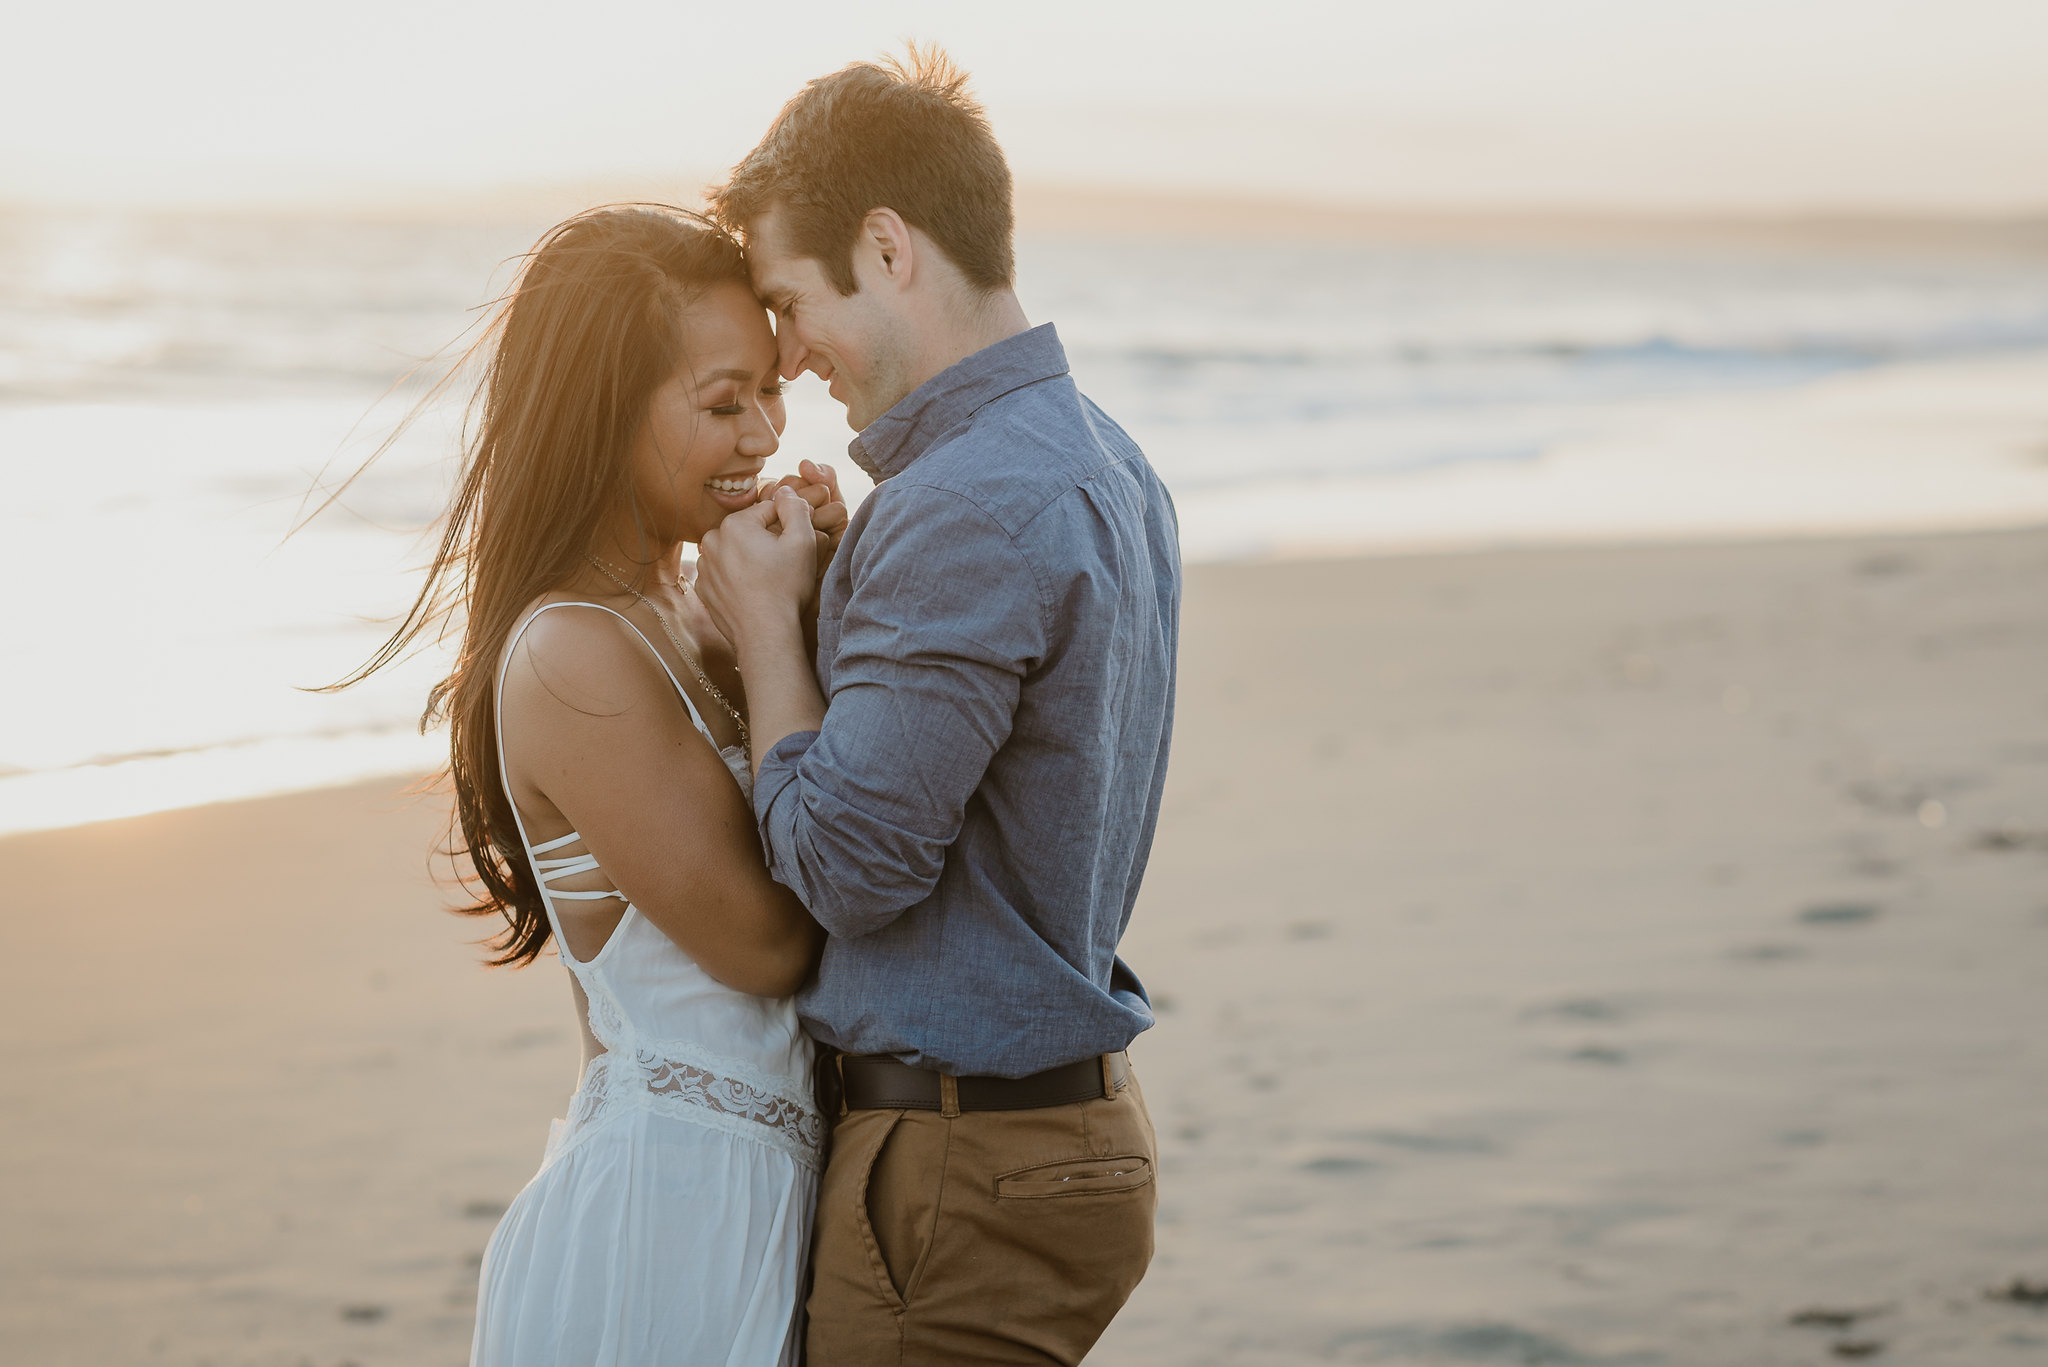 The Best (Non-Cheesy) Proposal Ideas For 2021